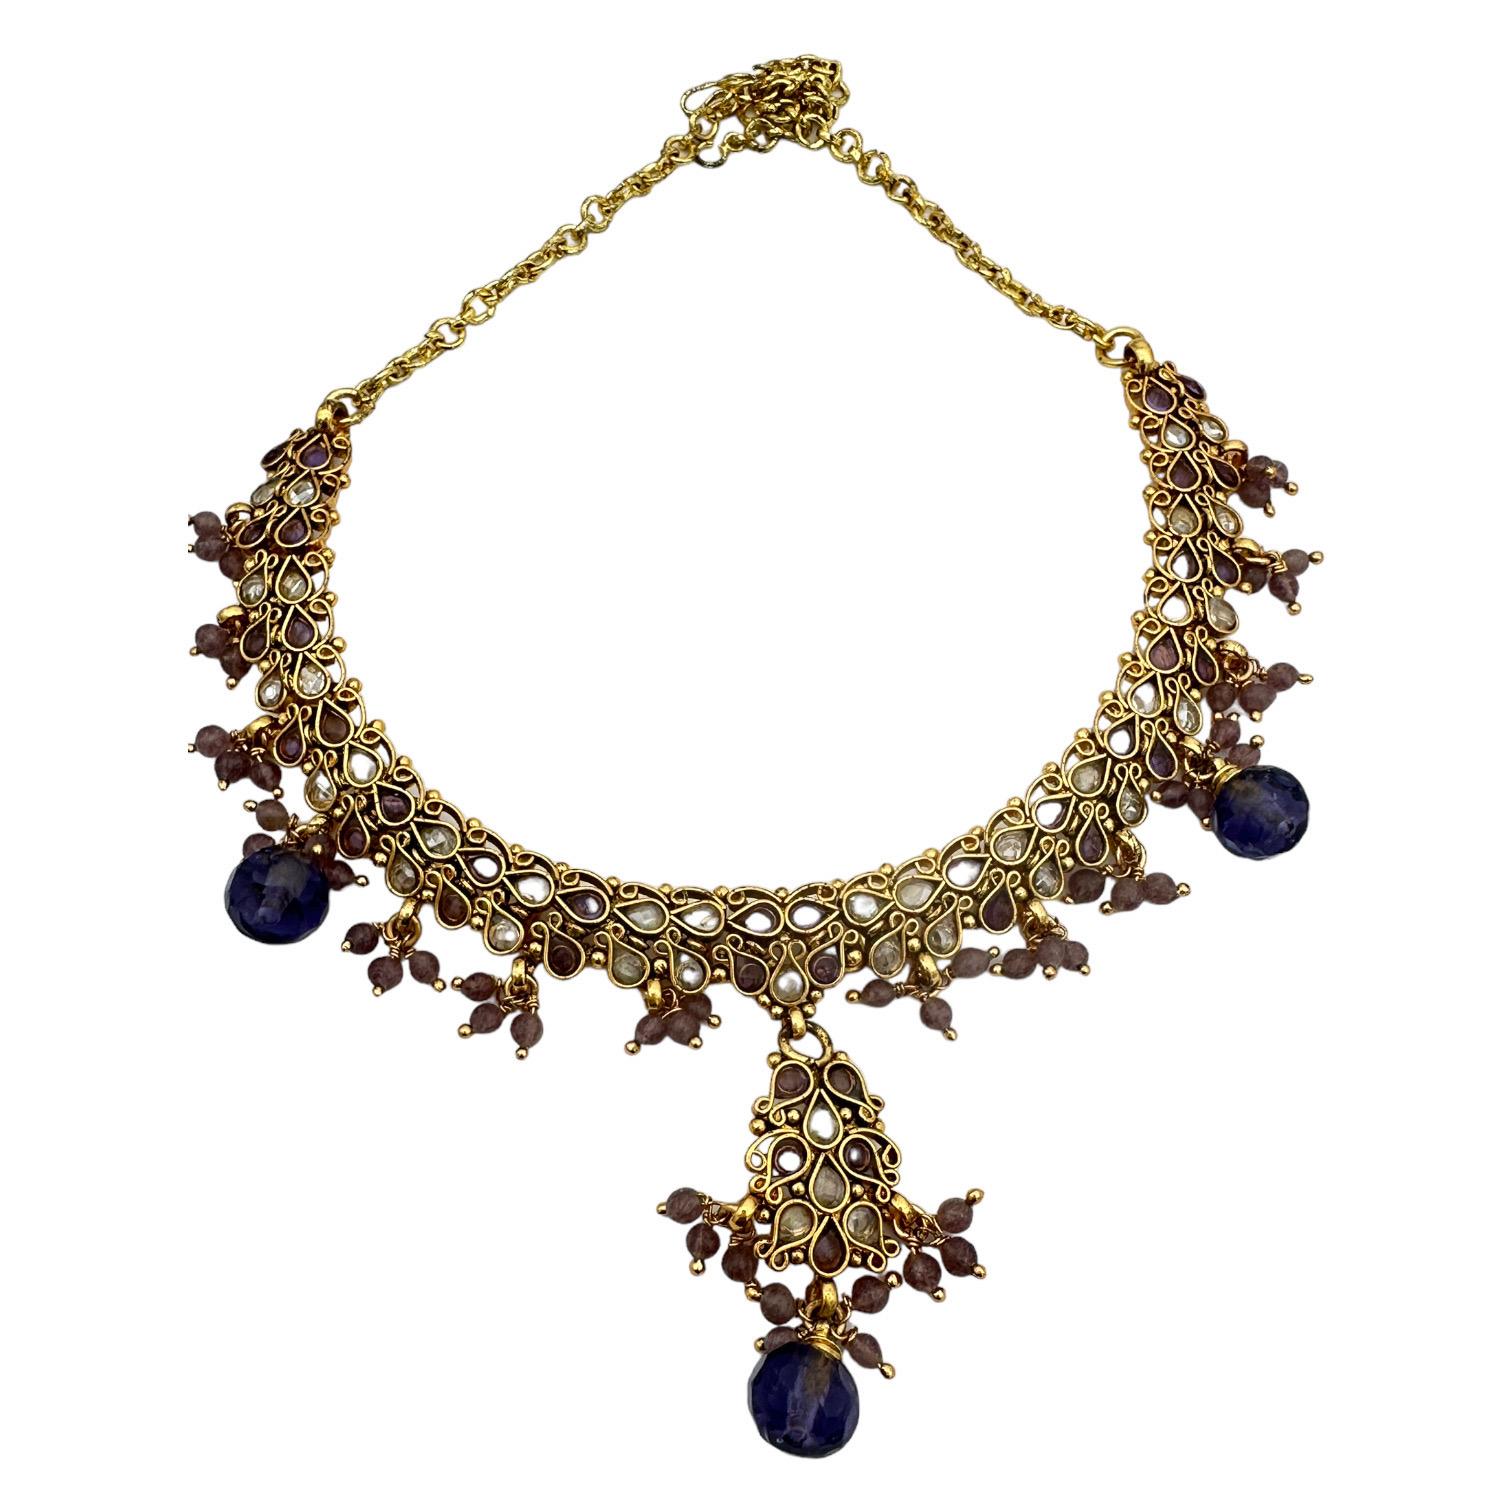  Add a touch of luxuriousness to your look with the Egyptian necklace. This ornate choker features an exquisite handmade design, delicately crafted using color to create a truly unique piece. Wear it day or night for a glamorous finish every time.

